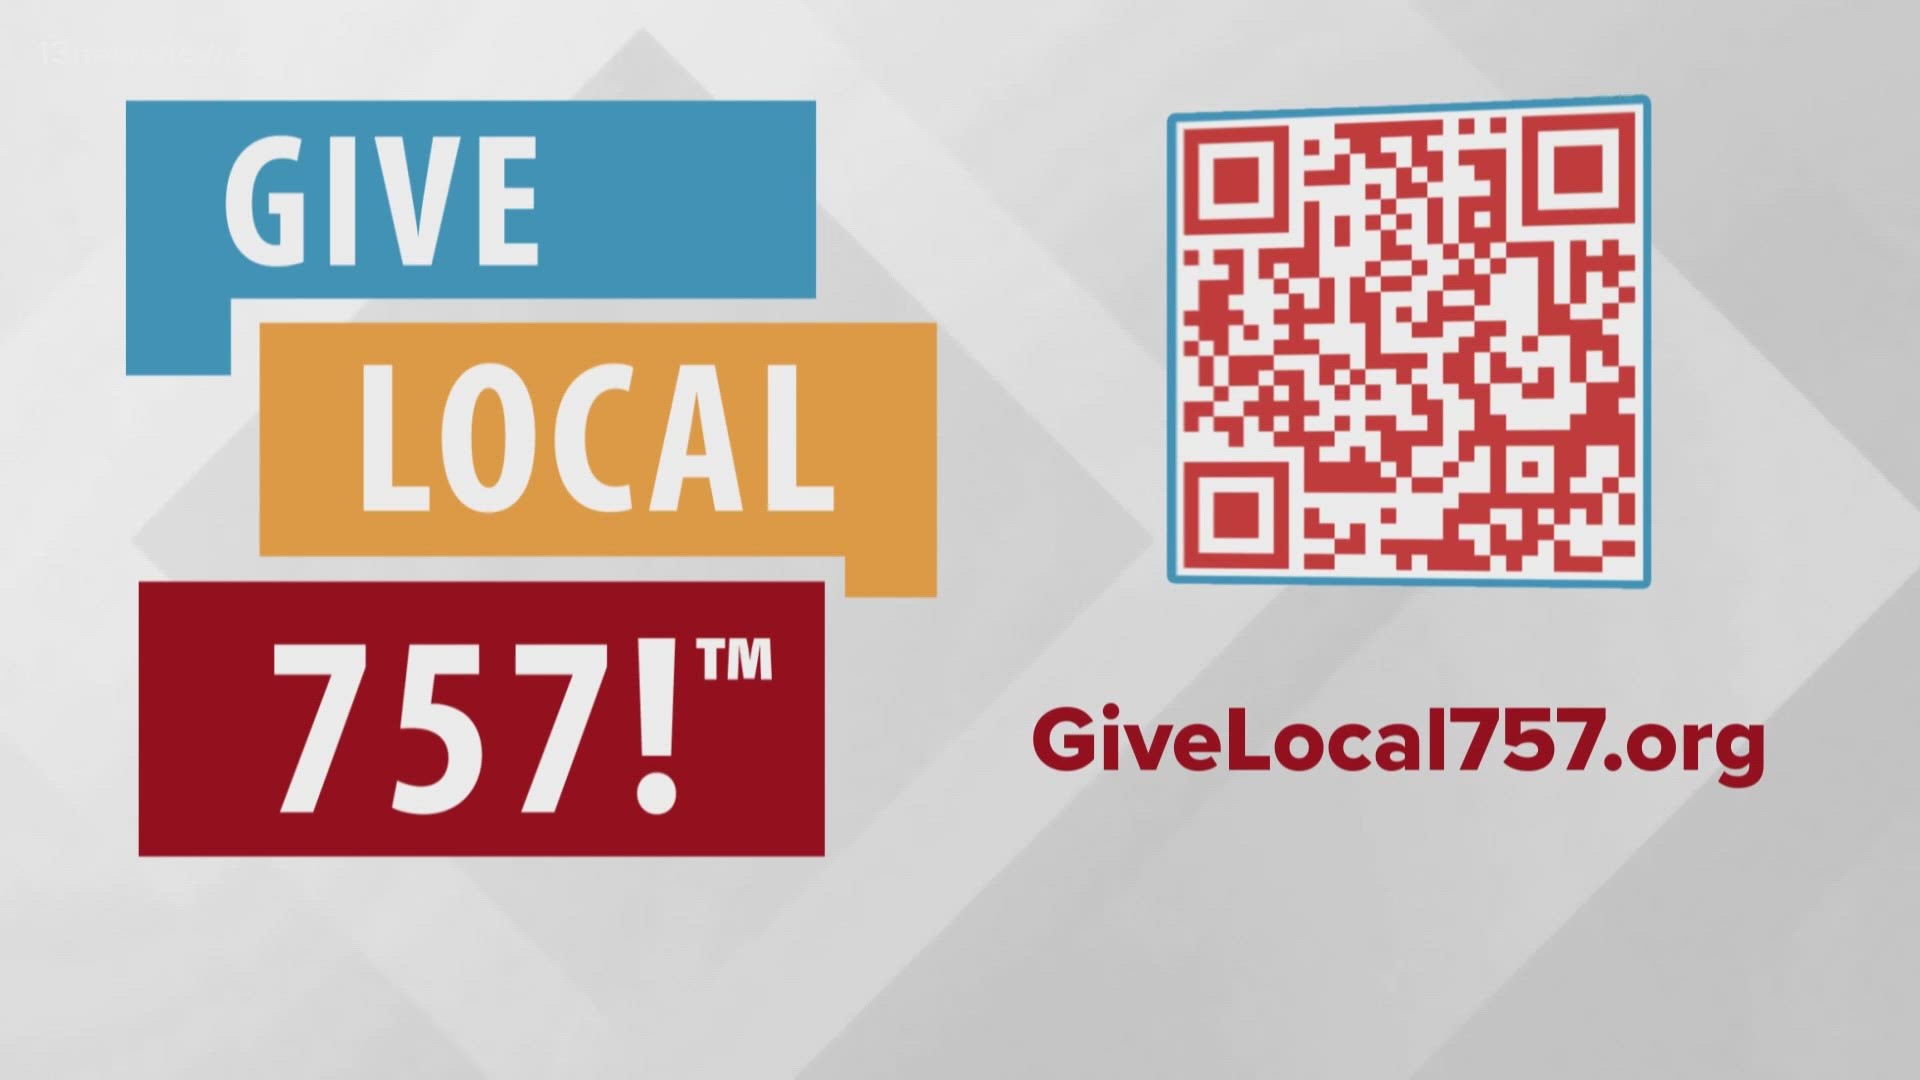 With your help, since midnight, we've raised more than 1.6 million dollars for 200 local nonprofits!